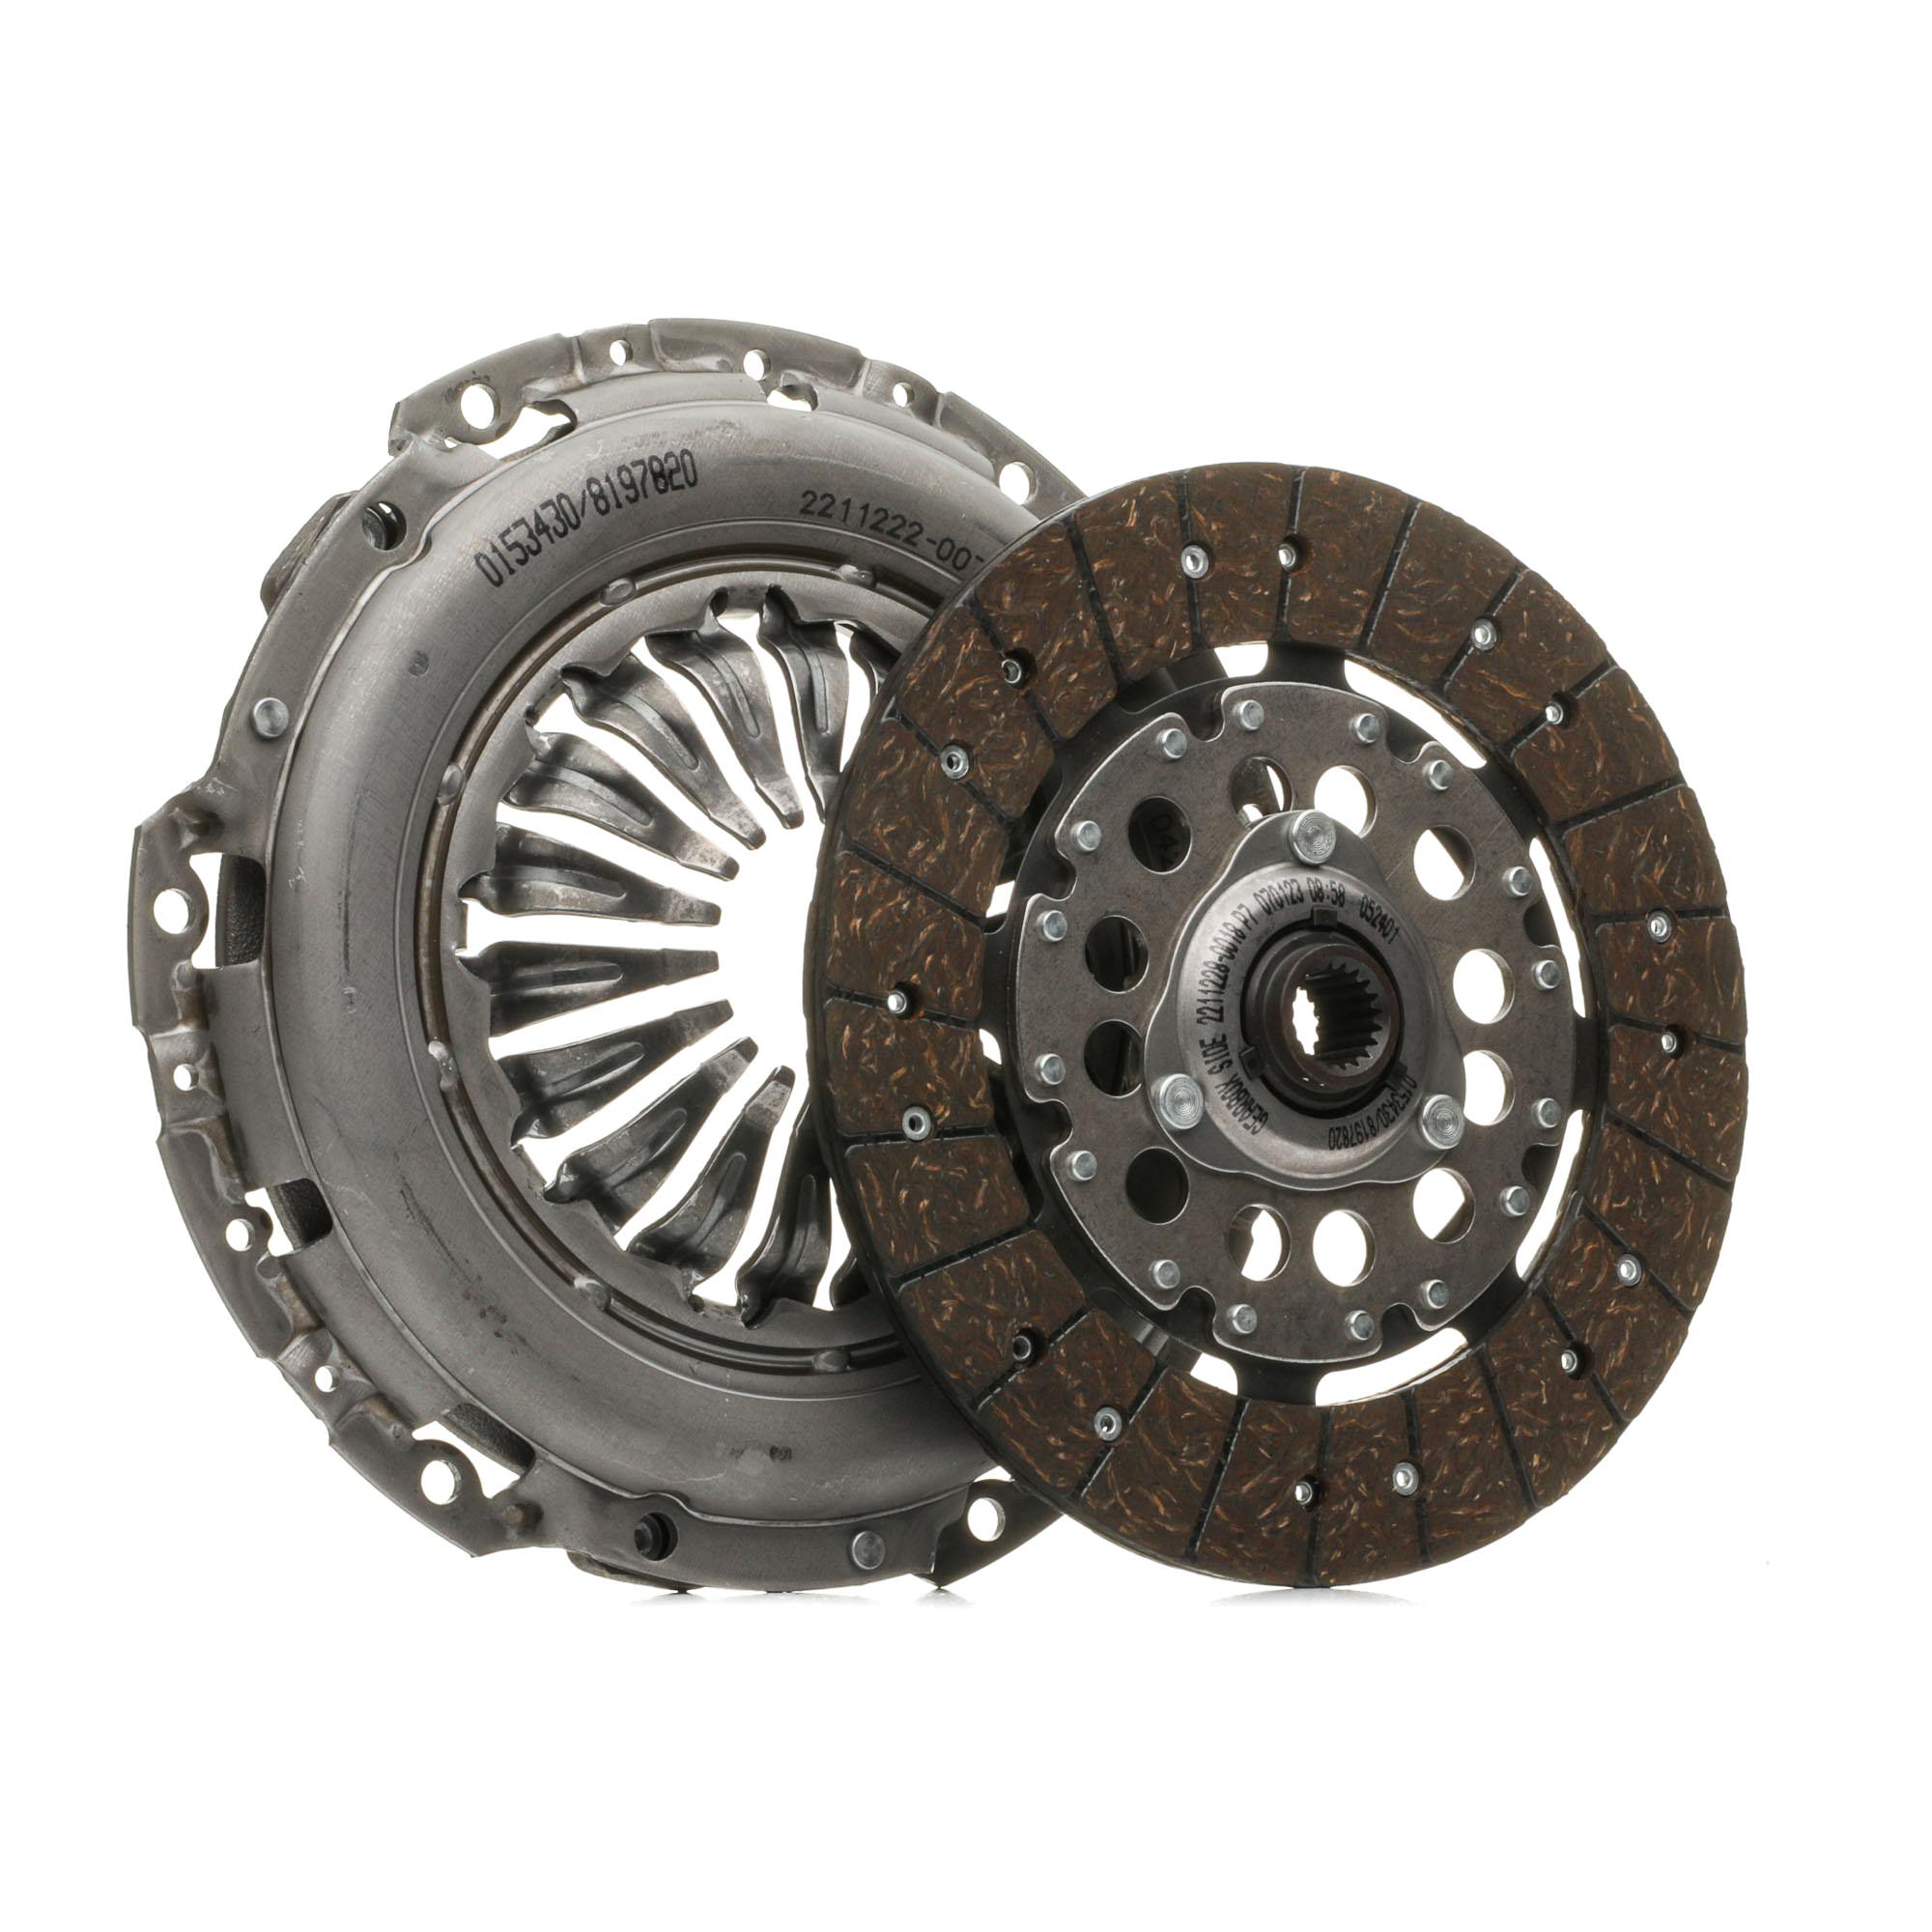 STARK SKCK-0100168 Clutch kit for engines with dual-mass flywheel, with clutch pressure plate, with clutch disc, without clutch release bearing, Requires special tools for mounting, Check and replace dual-mass flywheel if necessary., with automatic adjustment, 240mm